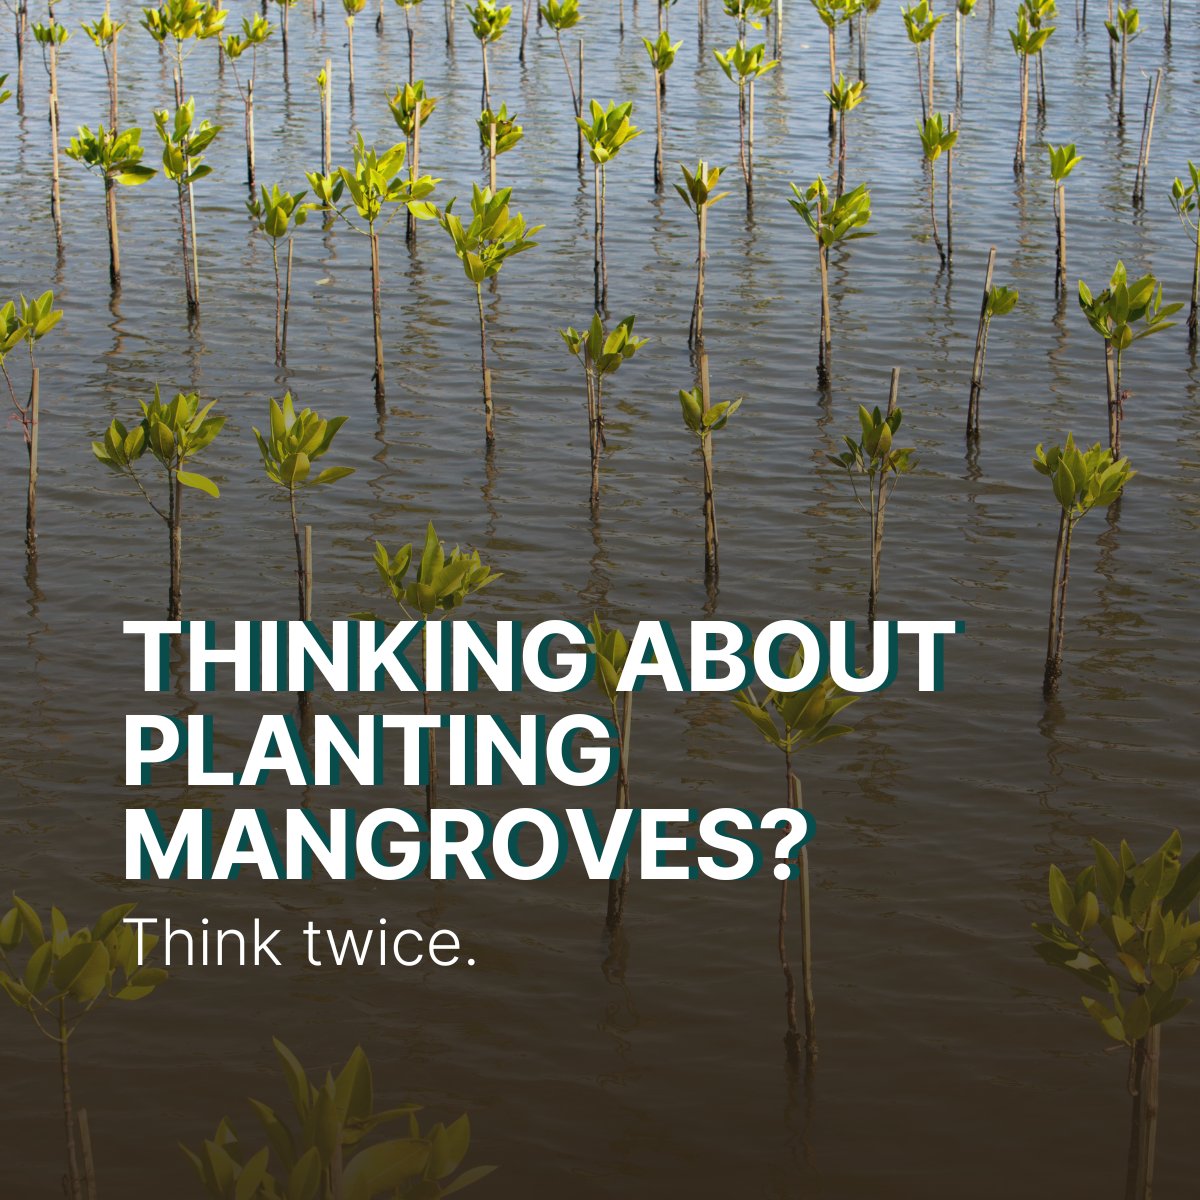 While, in some cases, planting can assist or enrich the natural regeneration process, the vast majority of planting projects fail to restore functional #mangroveforests.

So before you order your seedlings, here's a checklist to make sure your restoration efforts are successful: